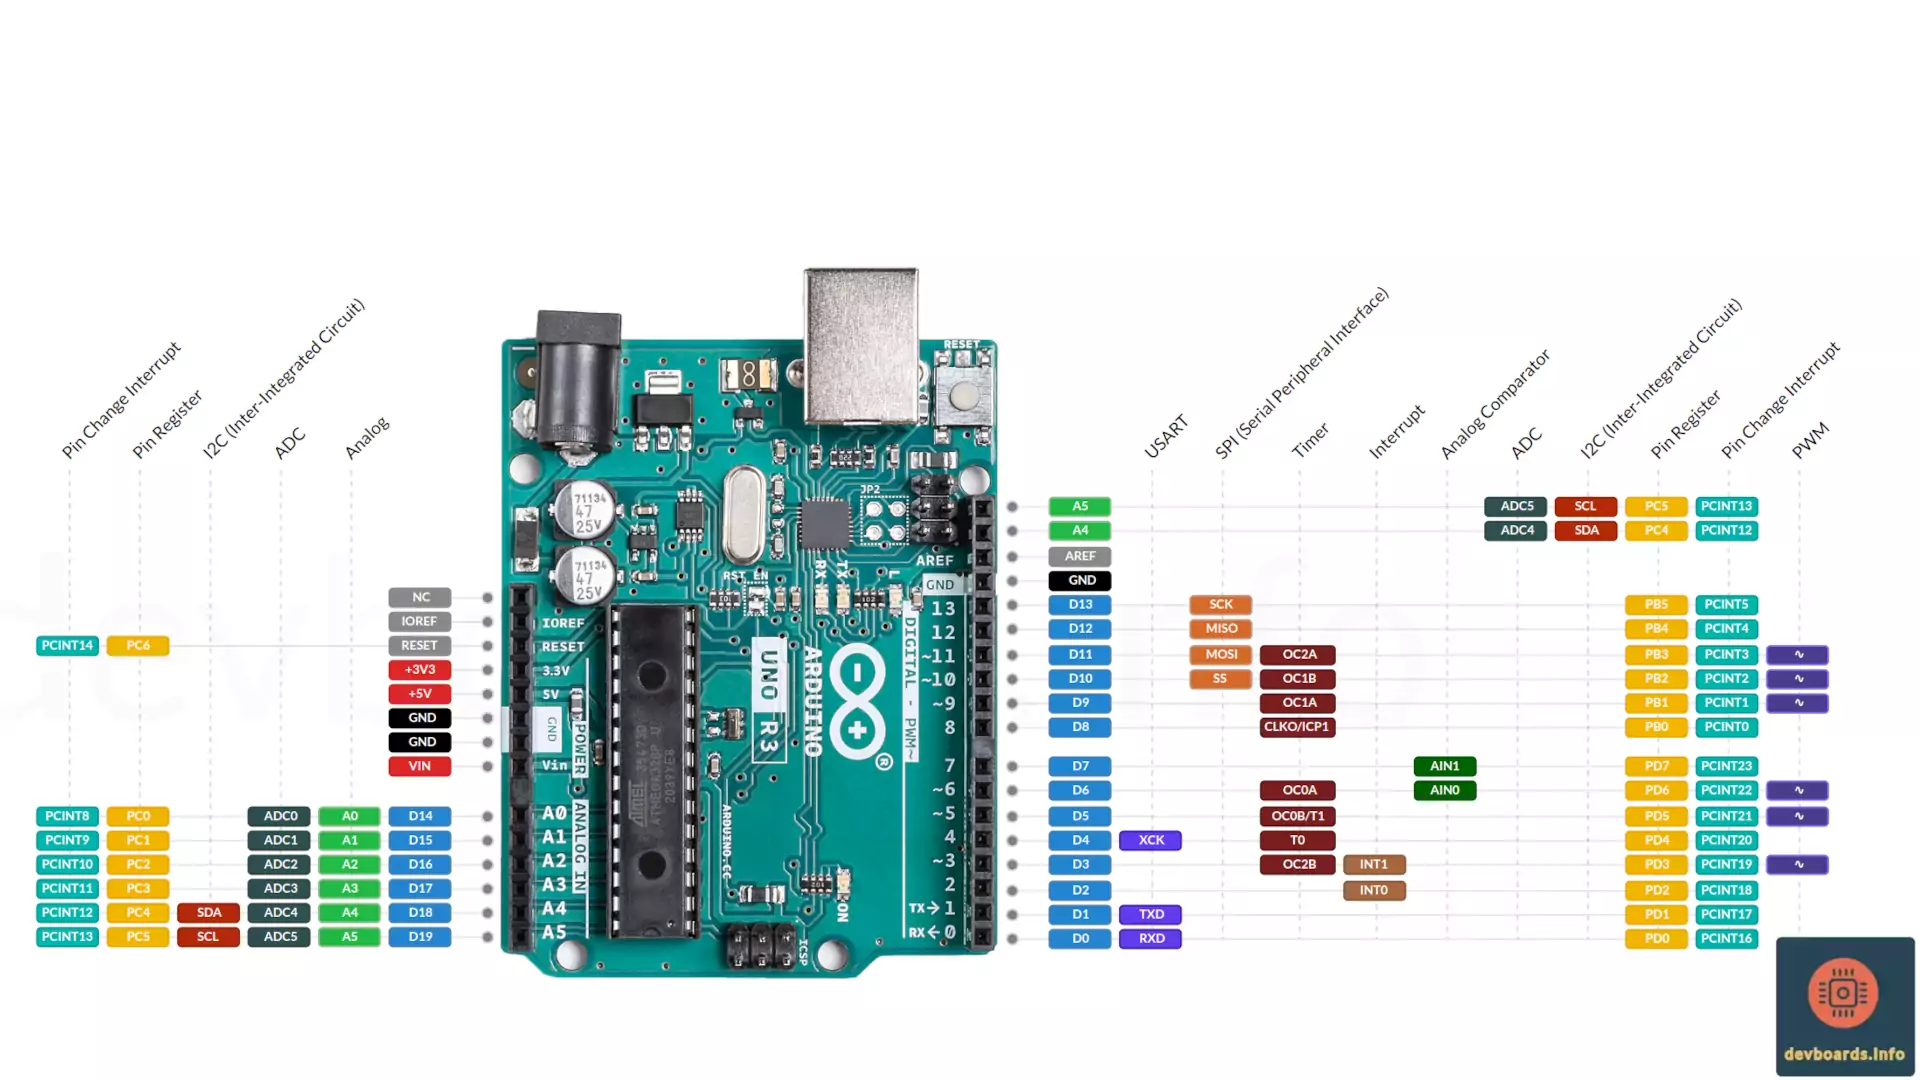 Arduino Uno Rev3 Pinout, Projects & Spec 